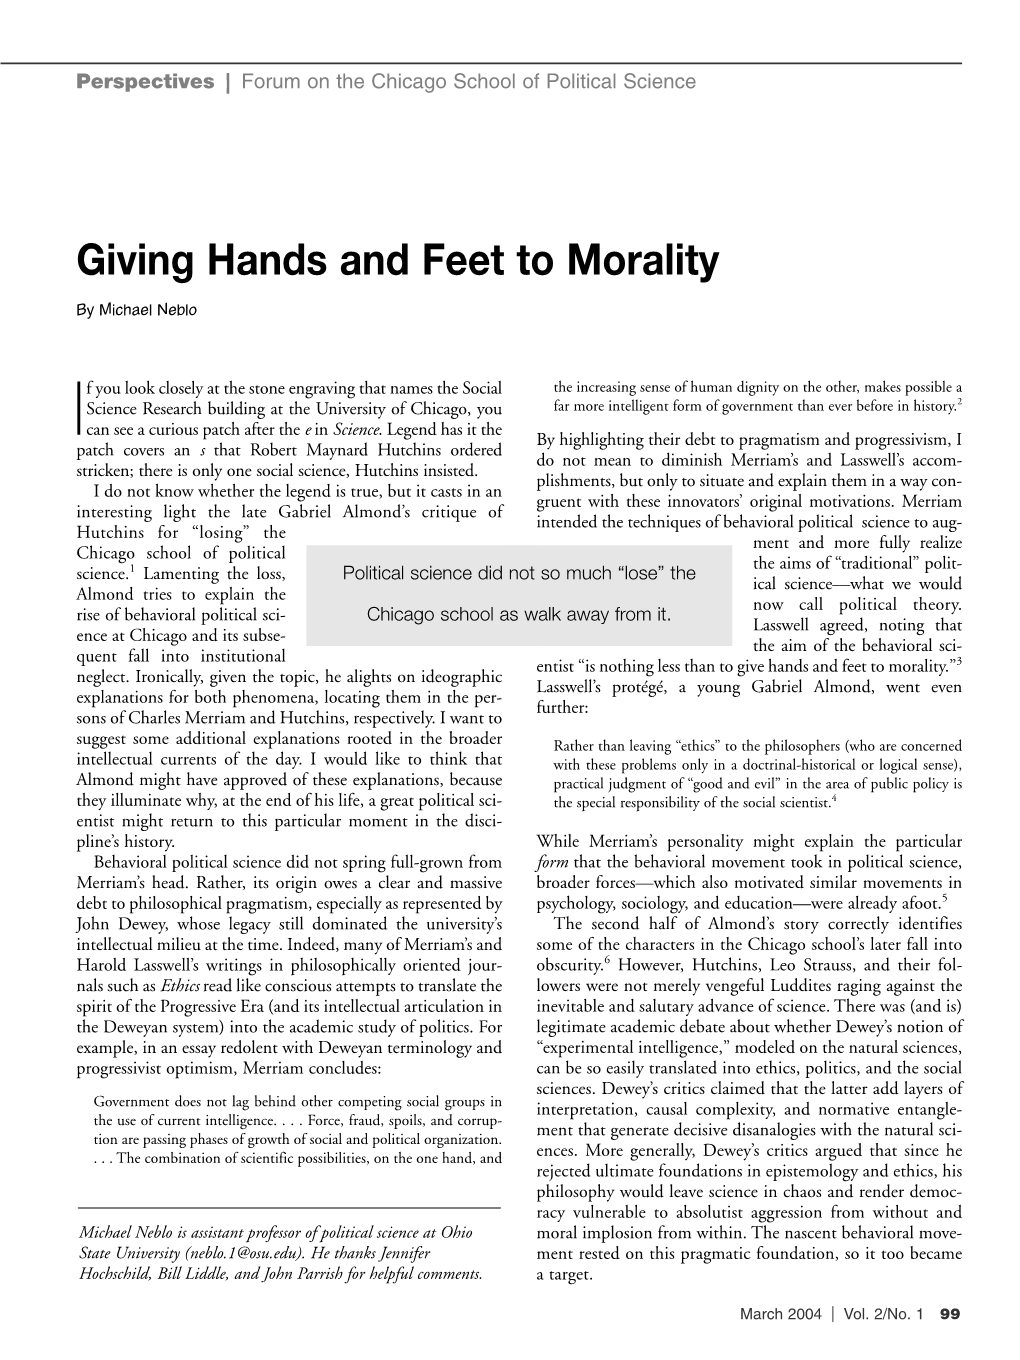 Giving Hands and Feet to Morality